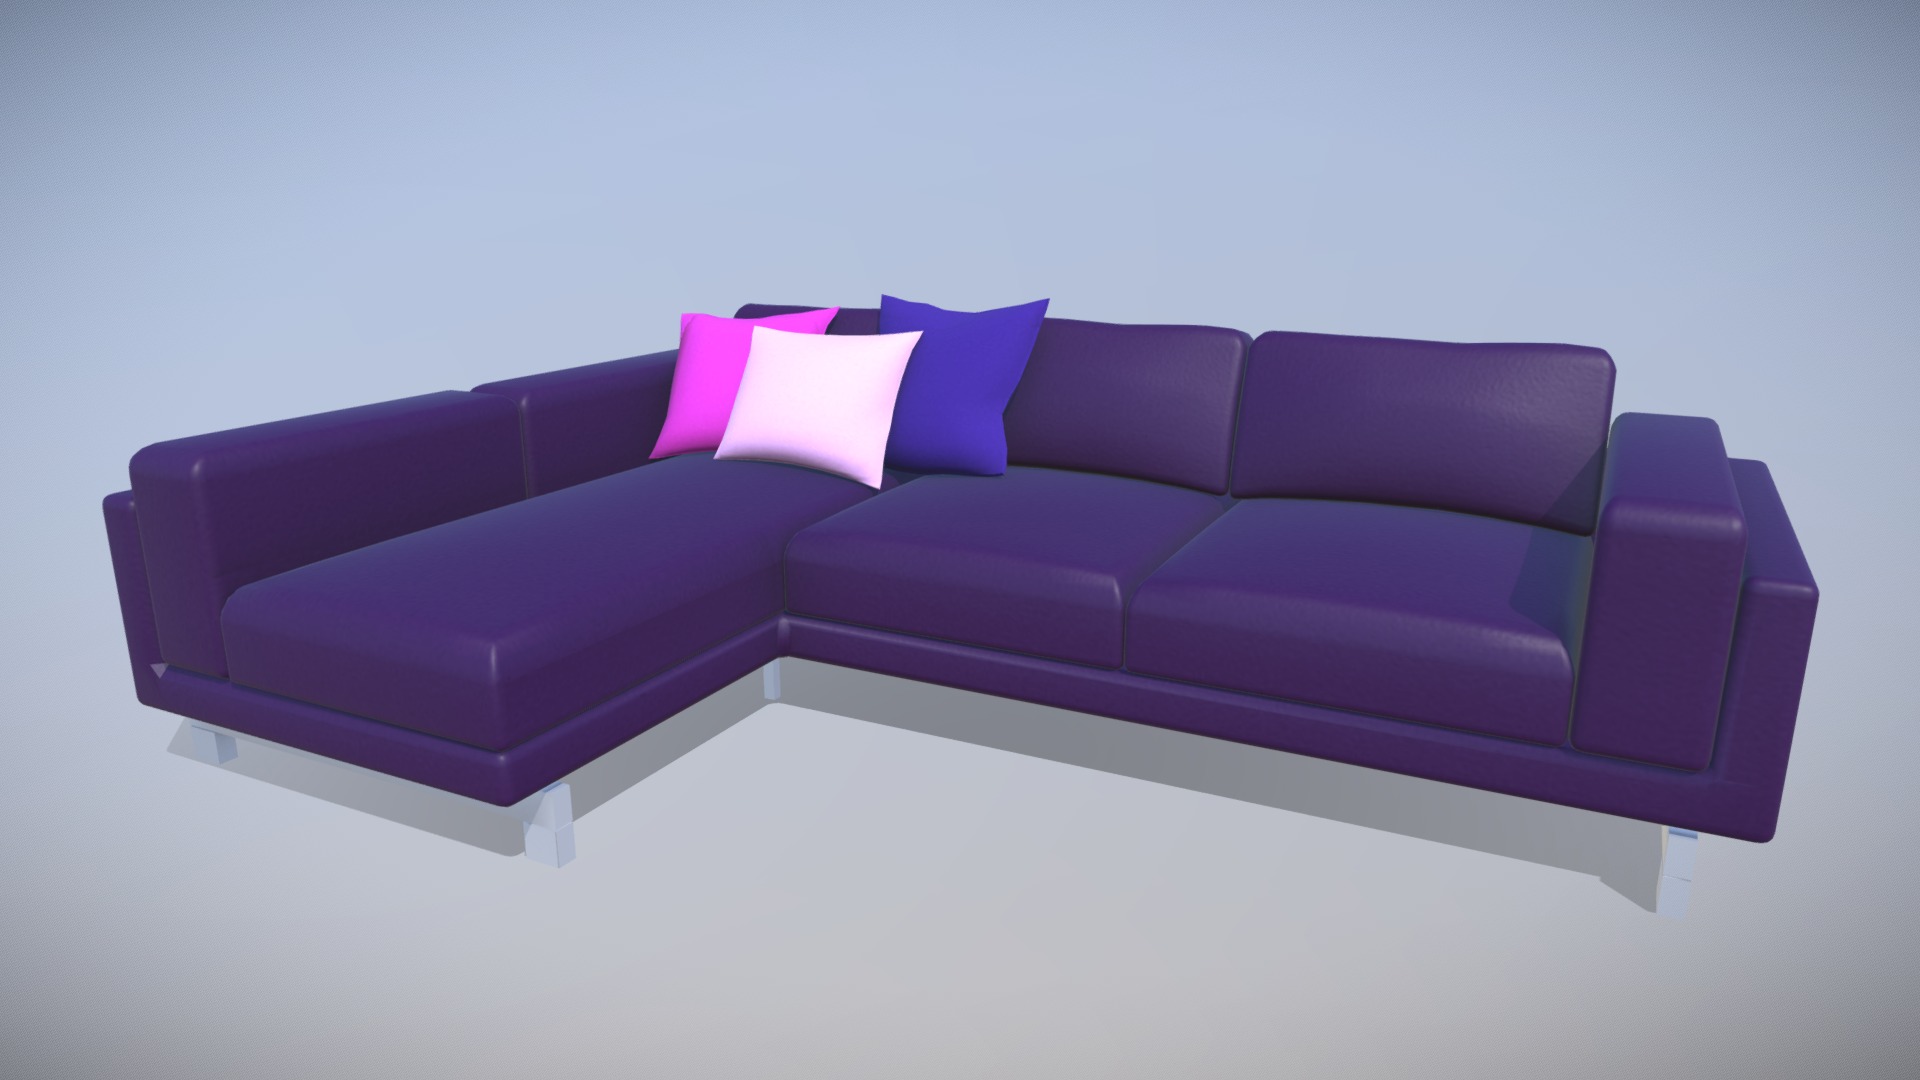 3D model Ikea Nockeby Leather Sofa VR AR Low-poly - This is a 3D model of the Ikea Nockeby Leather Sofa VR AR Low-poly. The 3D model is about a purple couch with pillows.